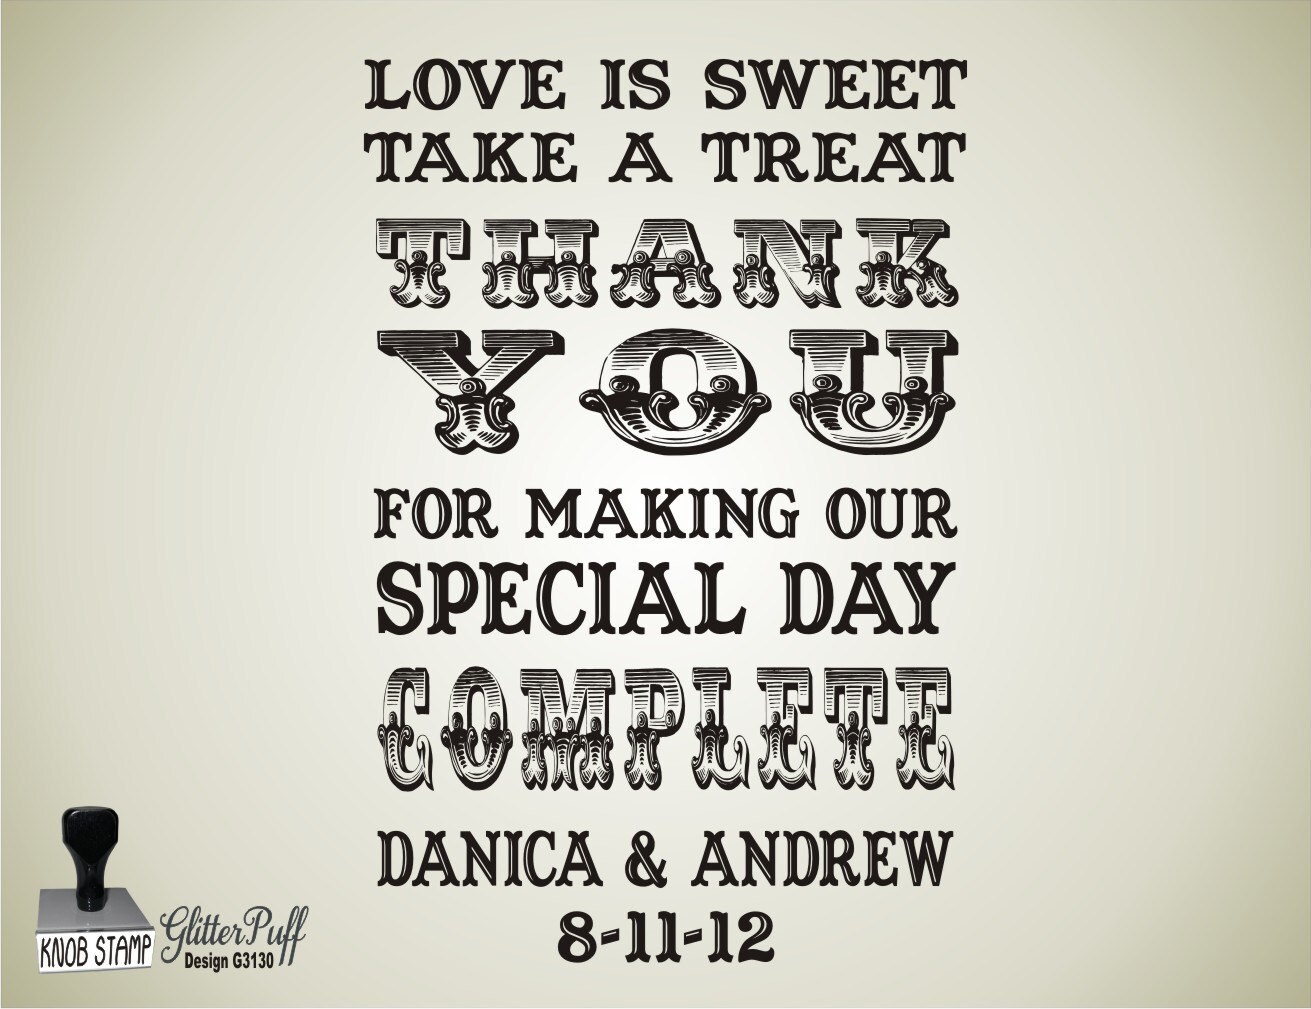 Download Love is SWEET Take a TREAT Wedding Rubber Stamp by GlitterPuff